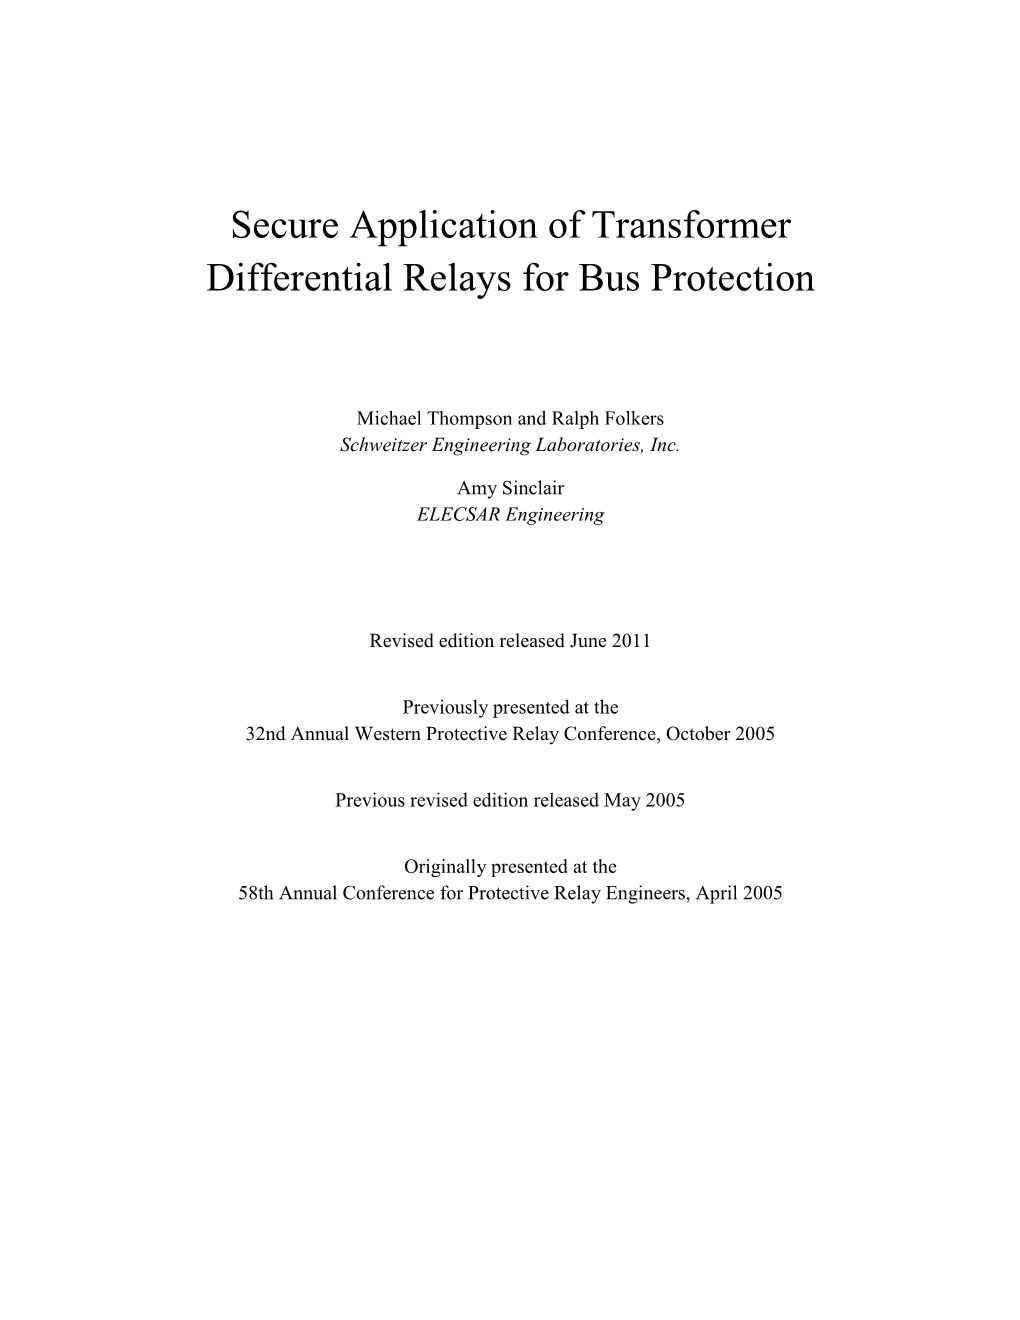 Secure Application of Transformer Differential Relays for Bus Protection